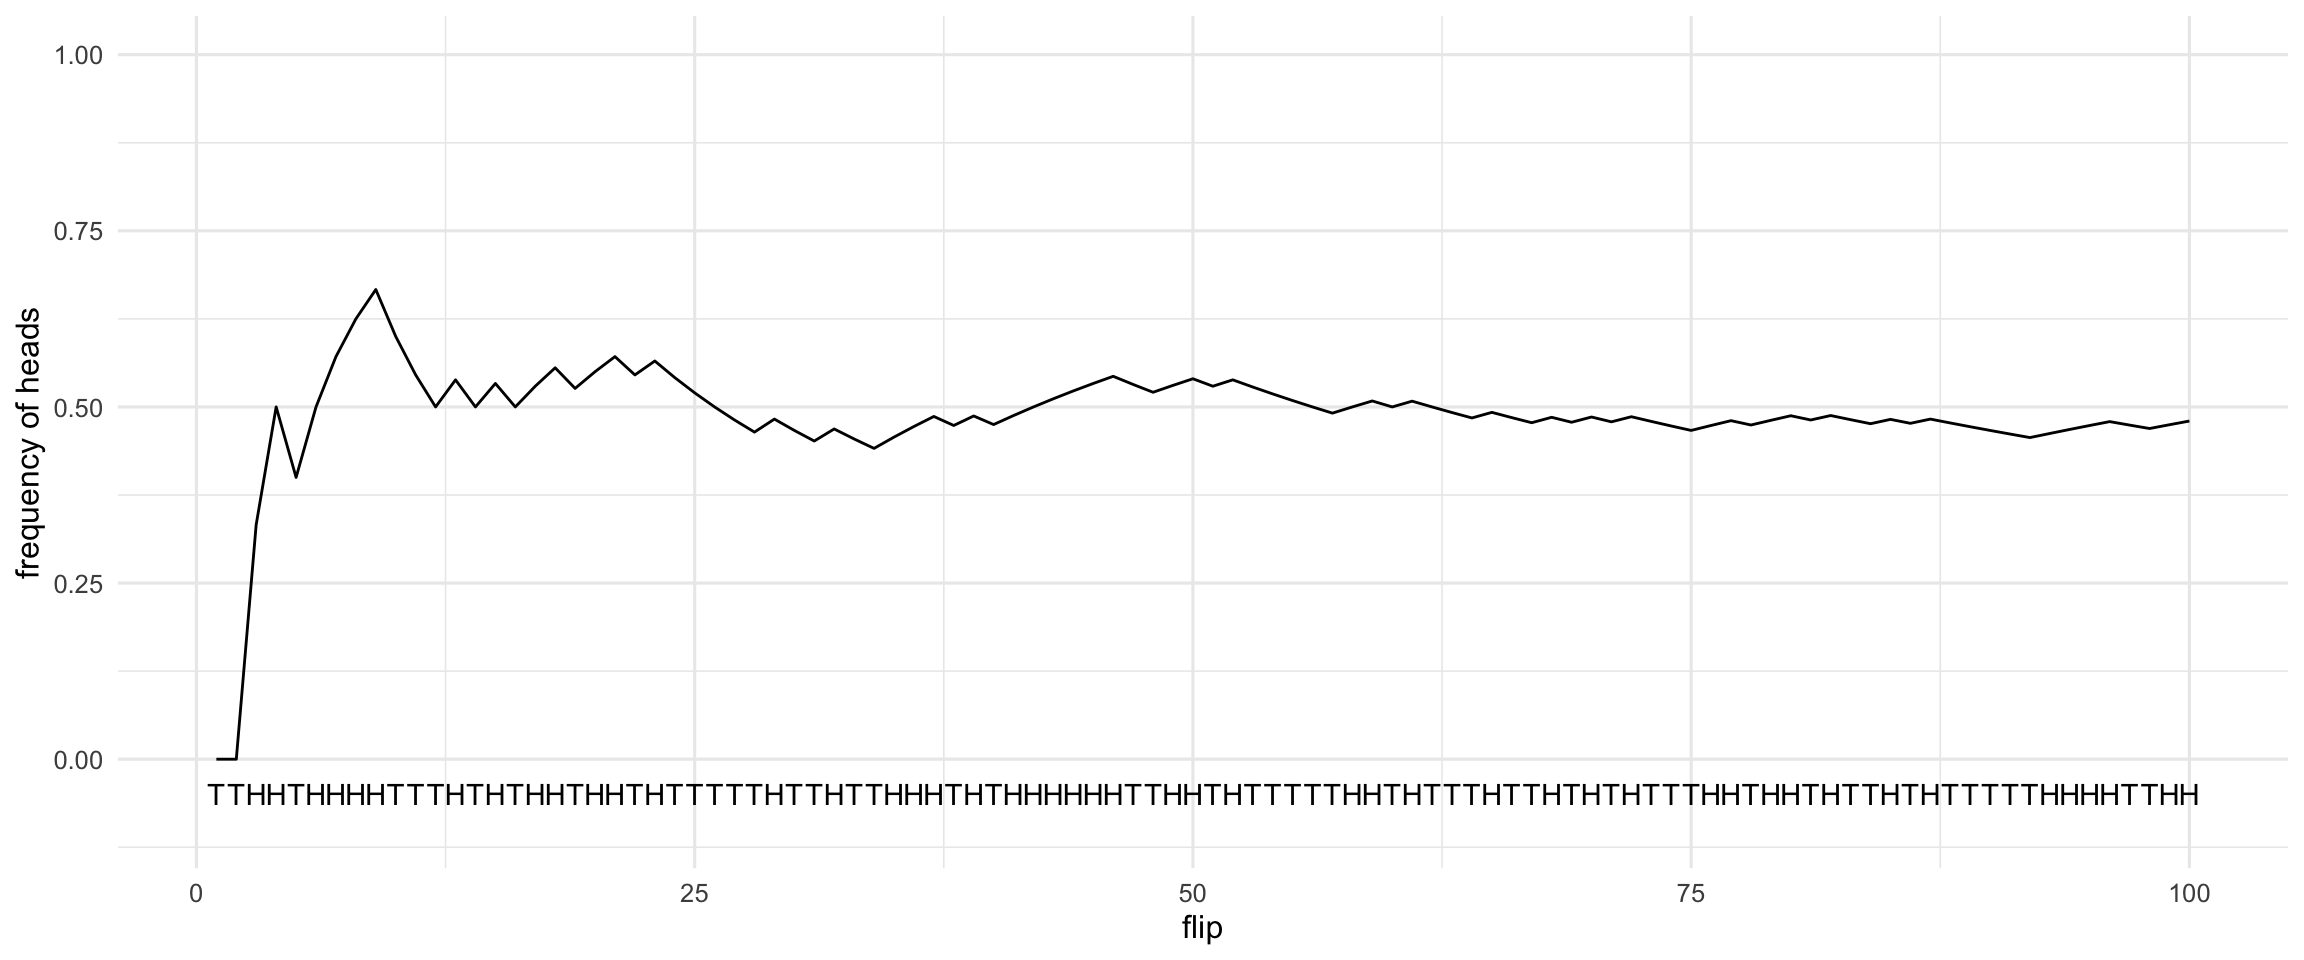 The frequency of heads over the course of $100$ coin flips. This particular sequence of heads and tails was generated by a computer simulation.